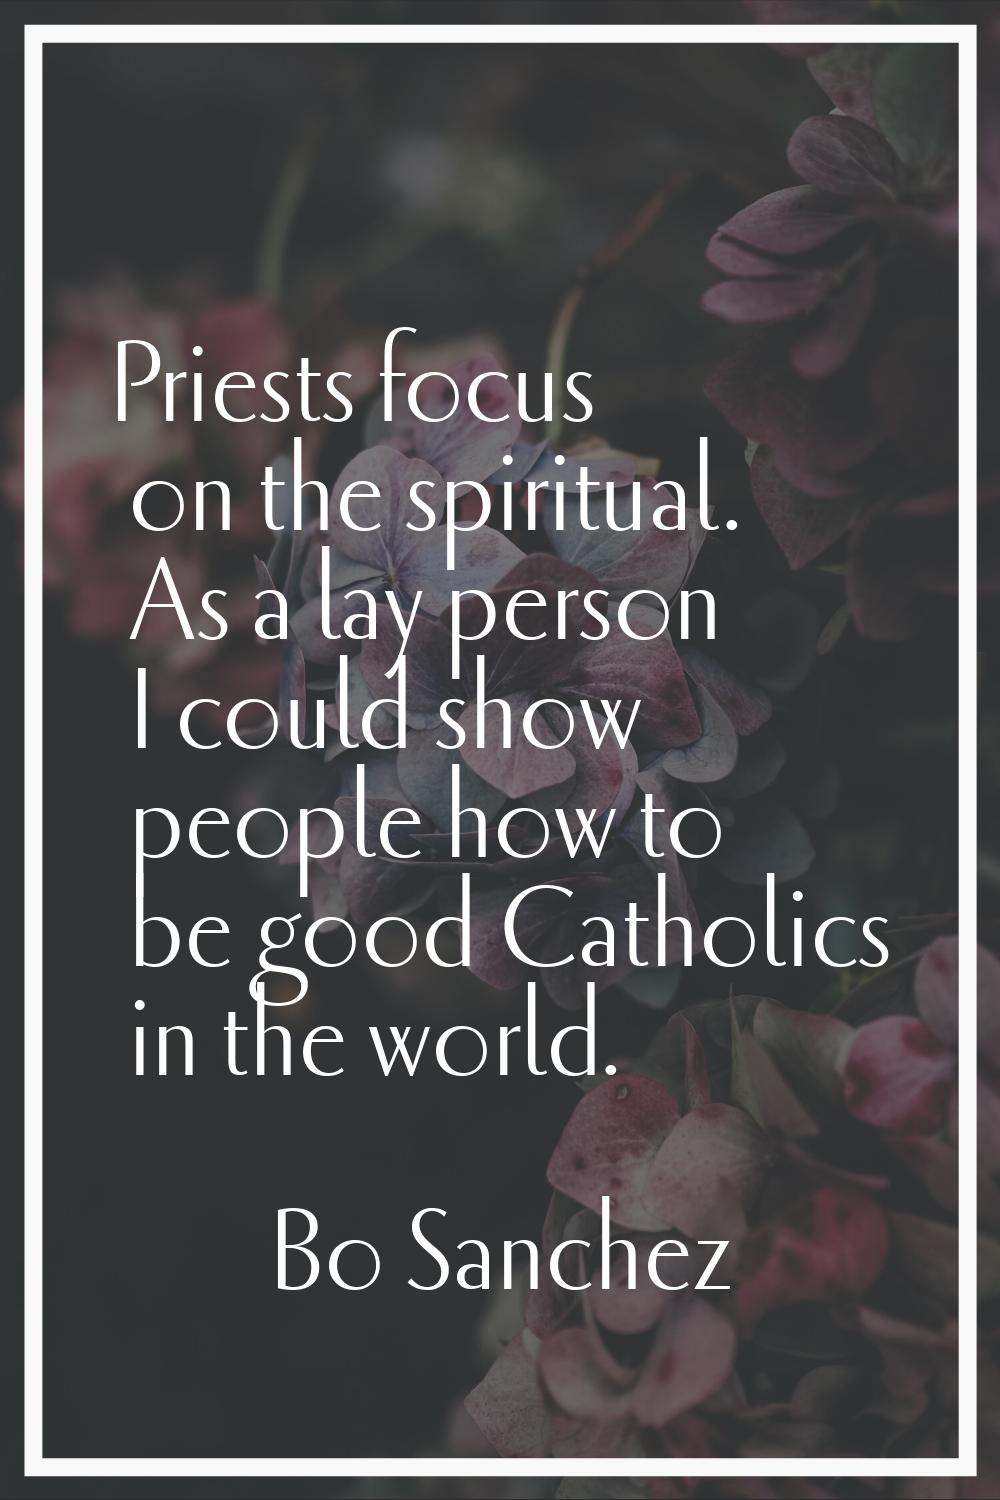 Priests focus on the spiritual. As a lay person I could show people how to be good Catholics in the